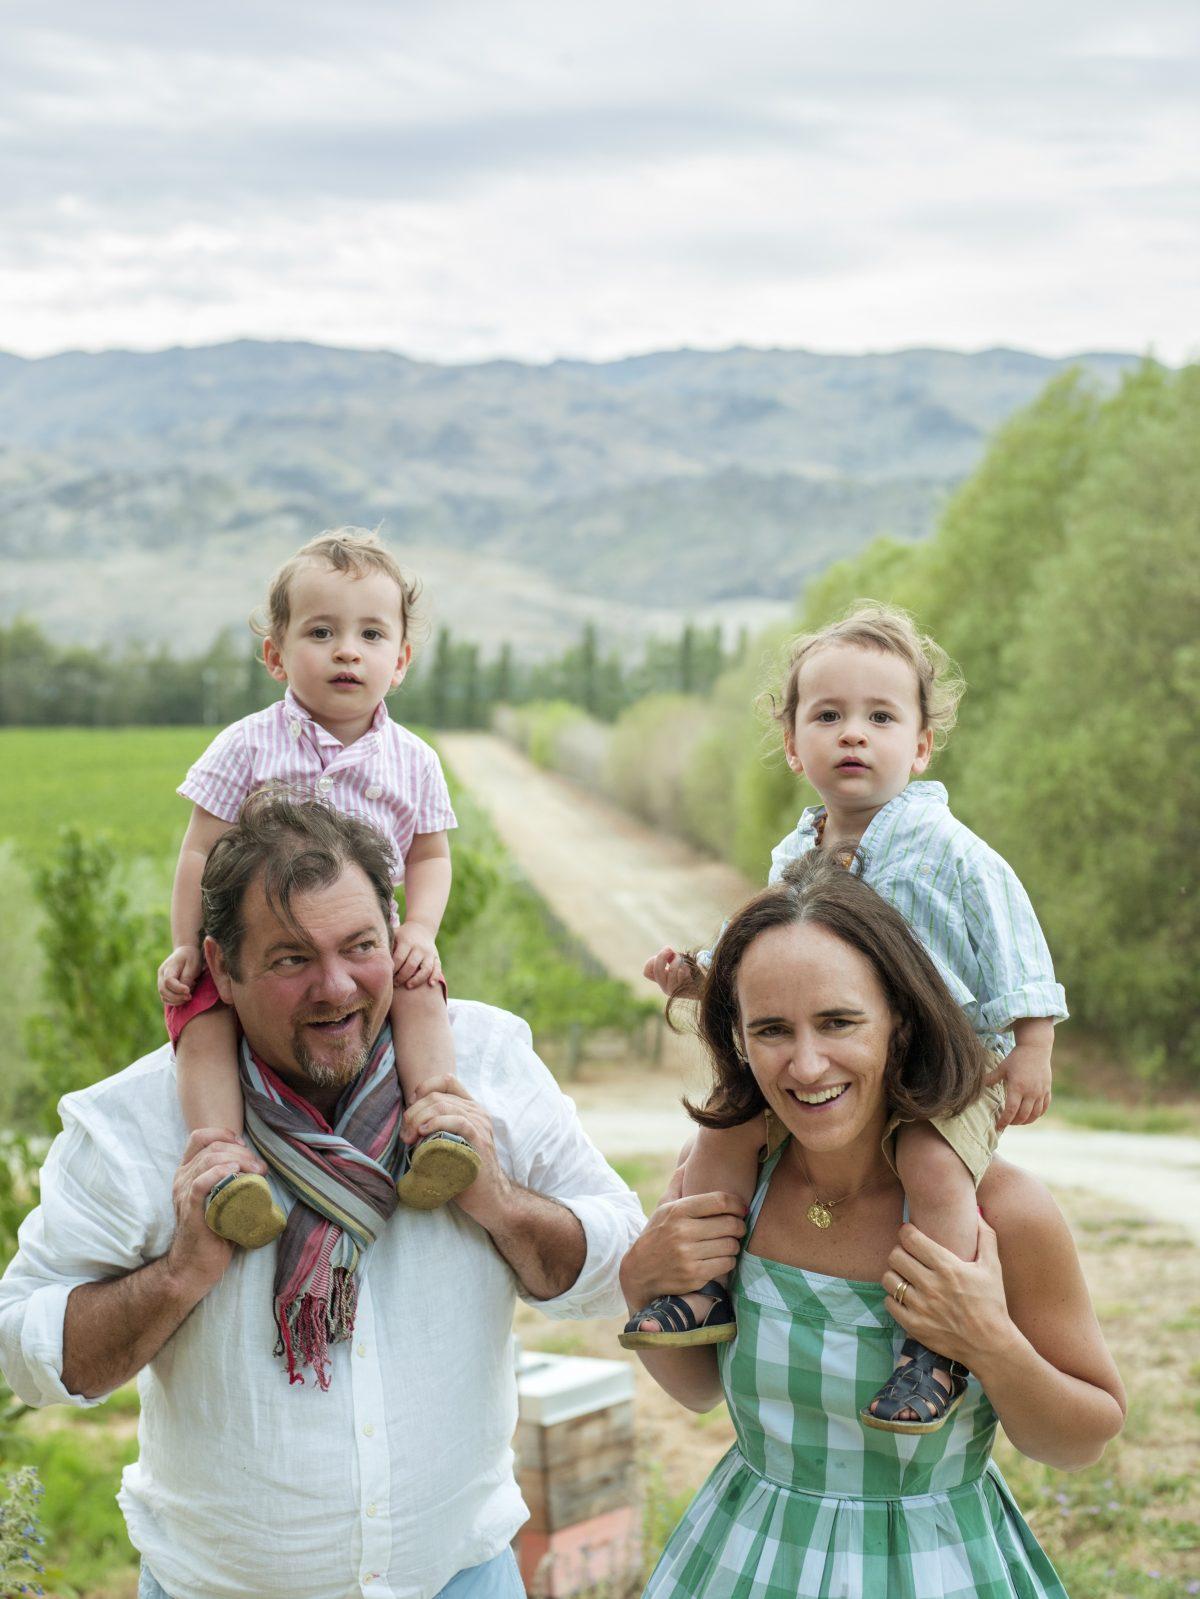 Yannick Fourbet at home with his family—wife Philippa and 3-year-old twins, Mortimer (L) and Augustin—in their Domaine Rewa vineyard on New Zealand's South Island. (Rachael McKenna)